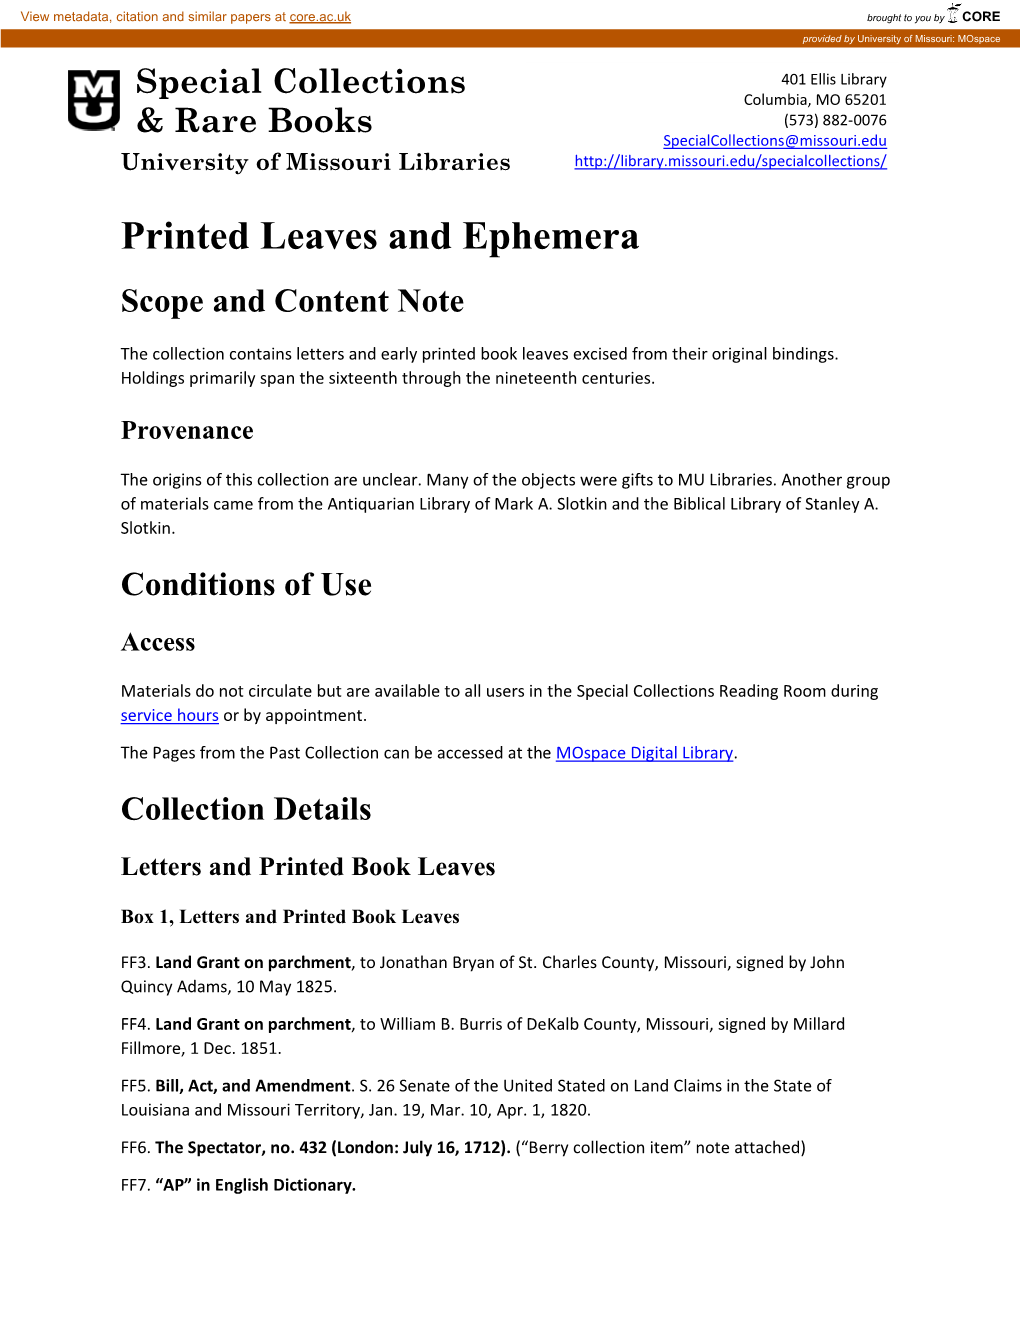 Printed Leaves and Ephemera Scope and Content Note